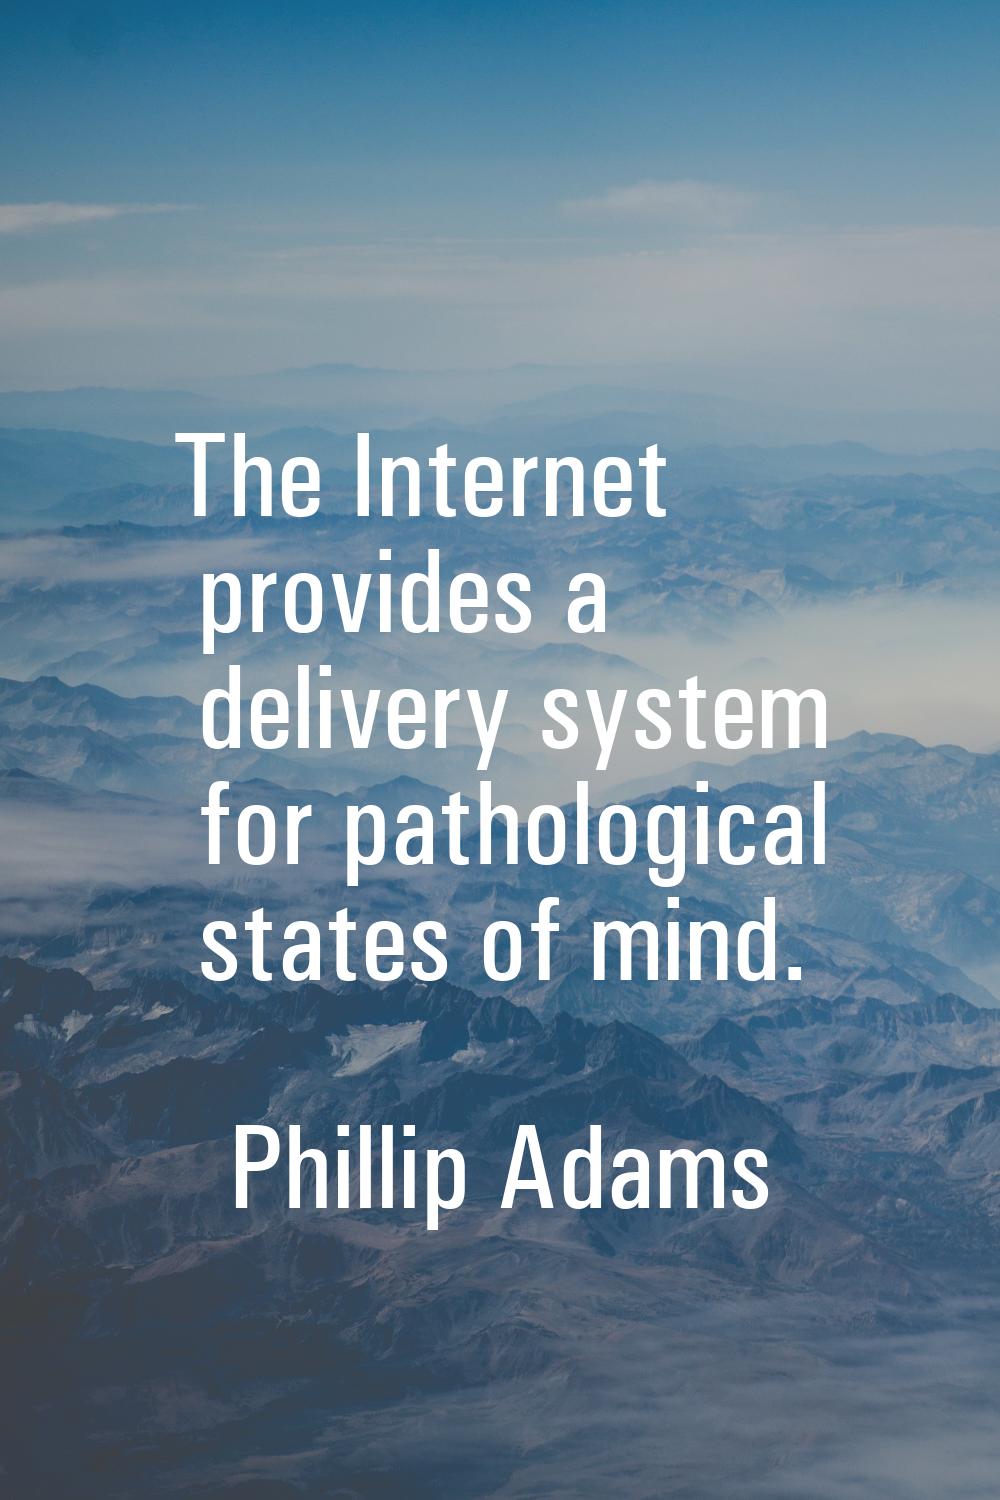 The Internet provides a delivery system for pathological states of mind.